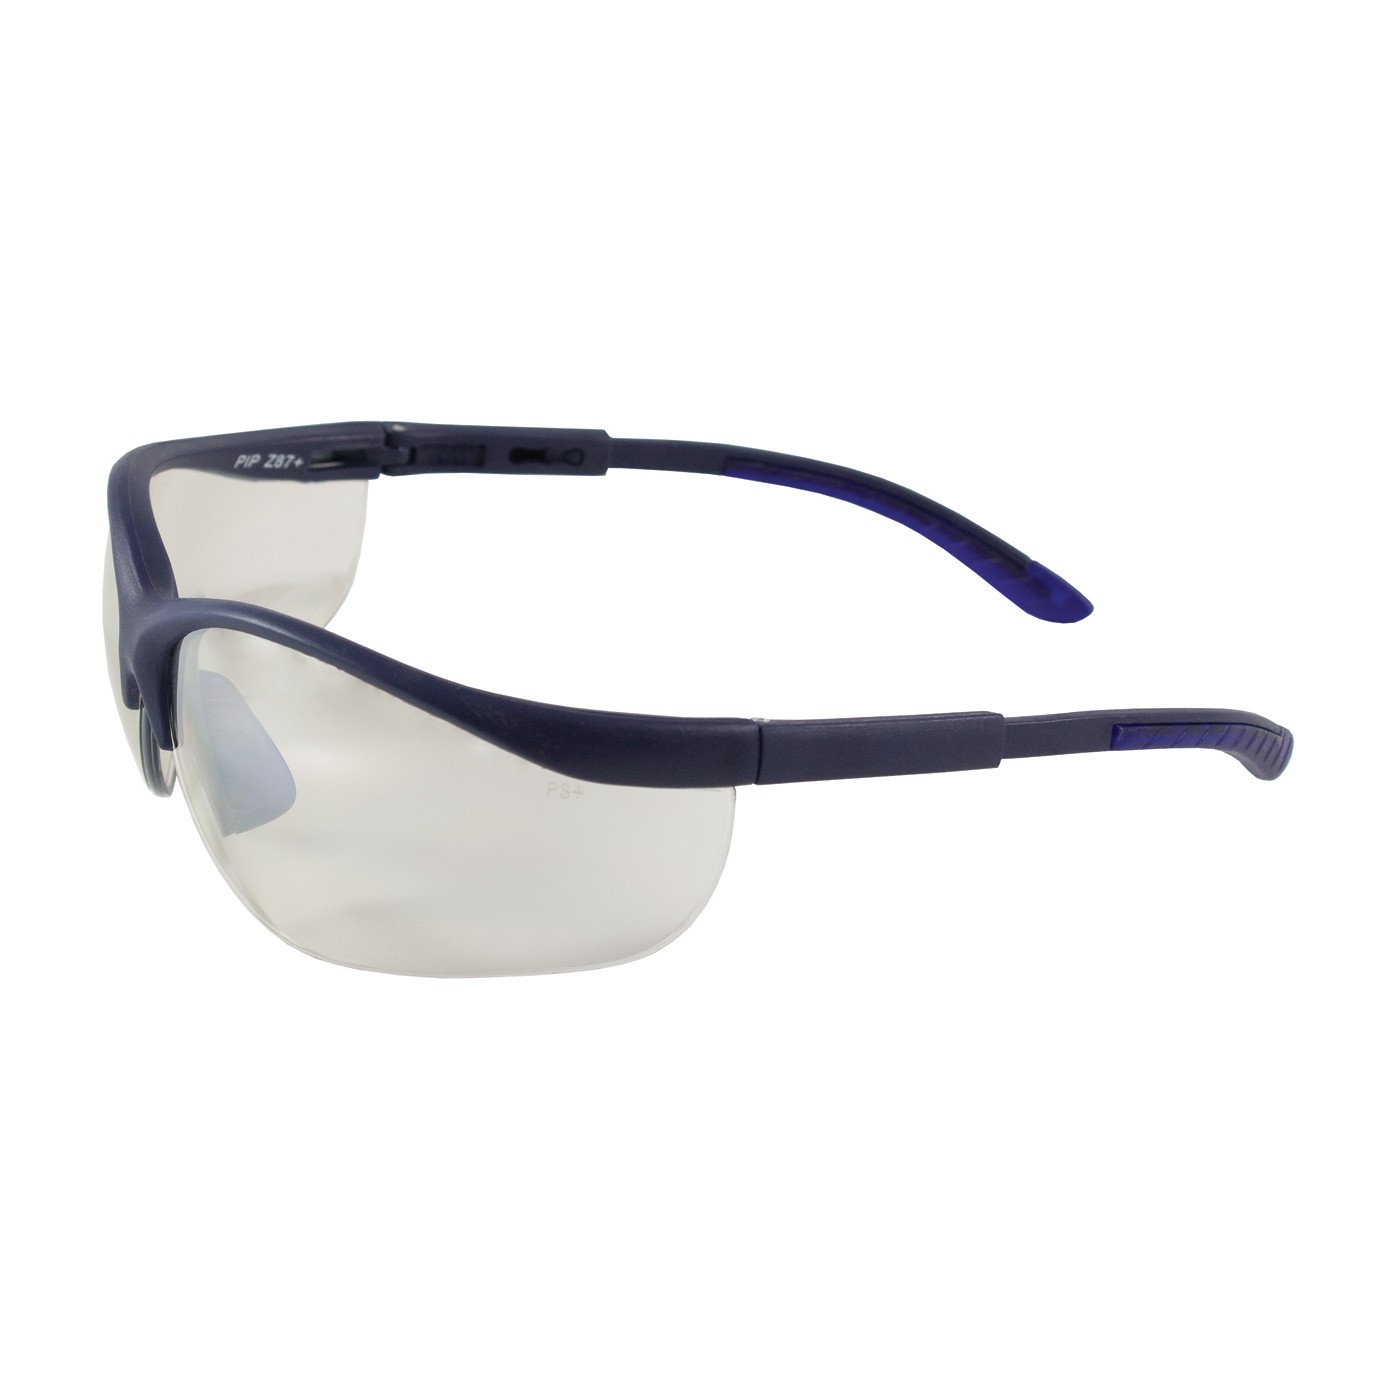 Hi-Voltage AC™ Semi-Rimless Safety Glasses with Blue Frame, I/O Lens and Anti-Scratch Coating  (#250-21-0102)